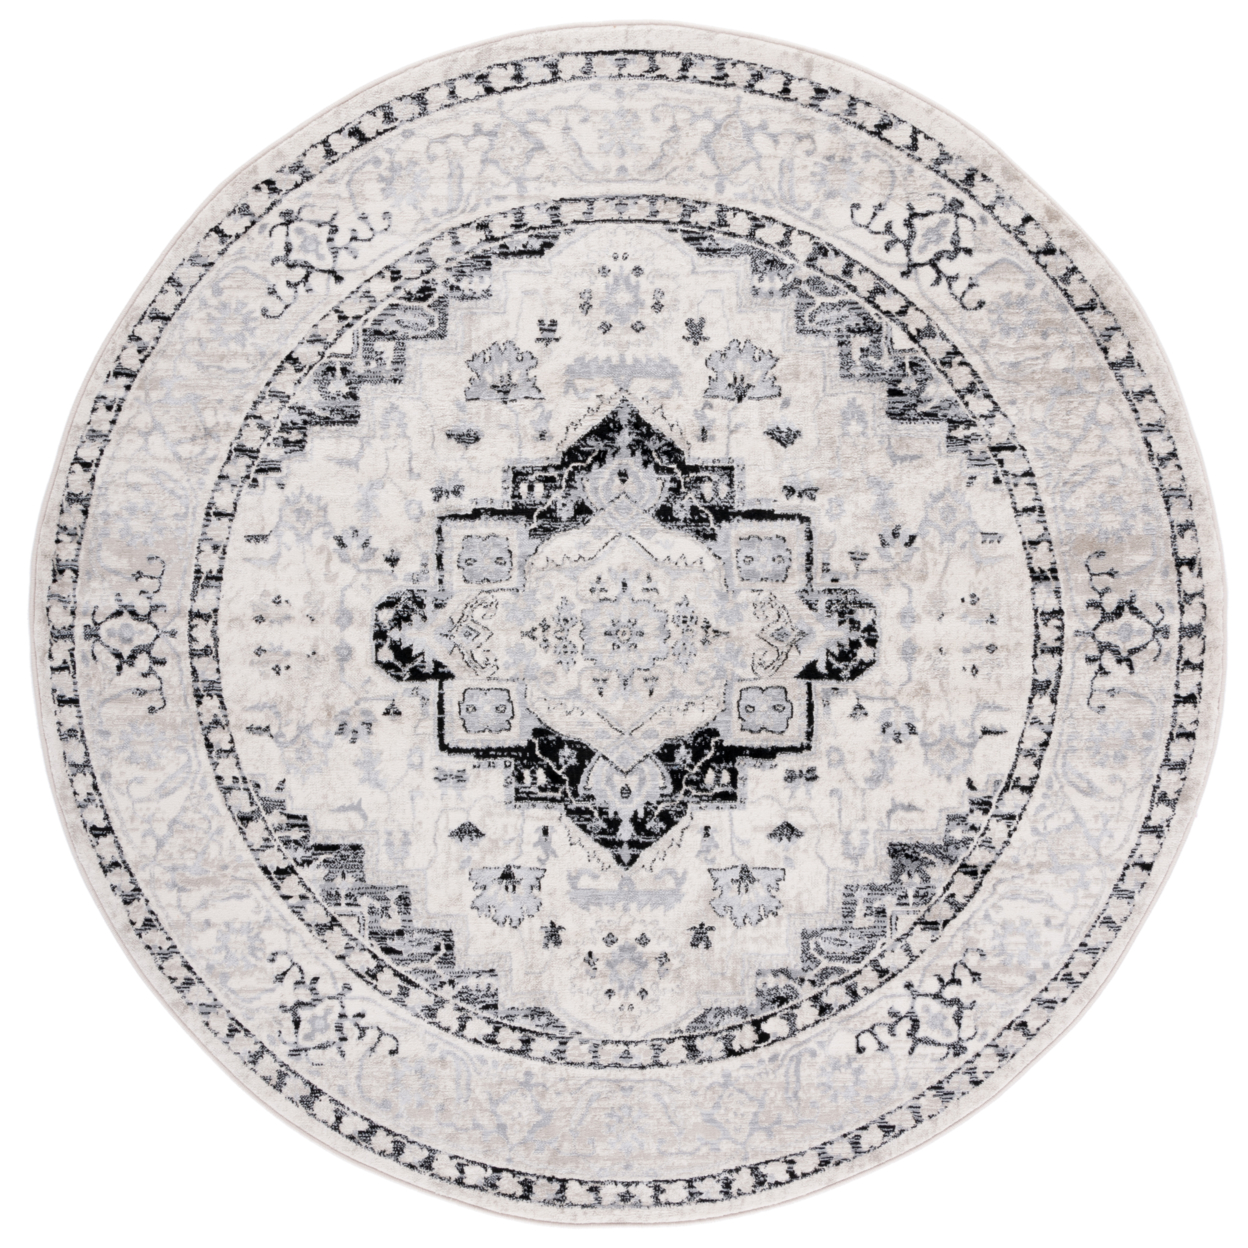 SAFAVIEH Brentwood Collection BNT851C Ivory / Black Rug - 6' X 9'